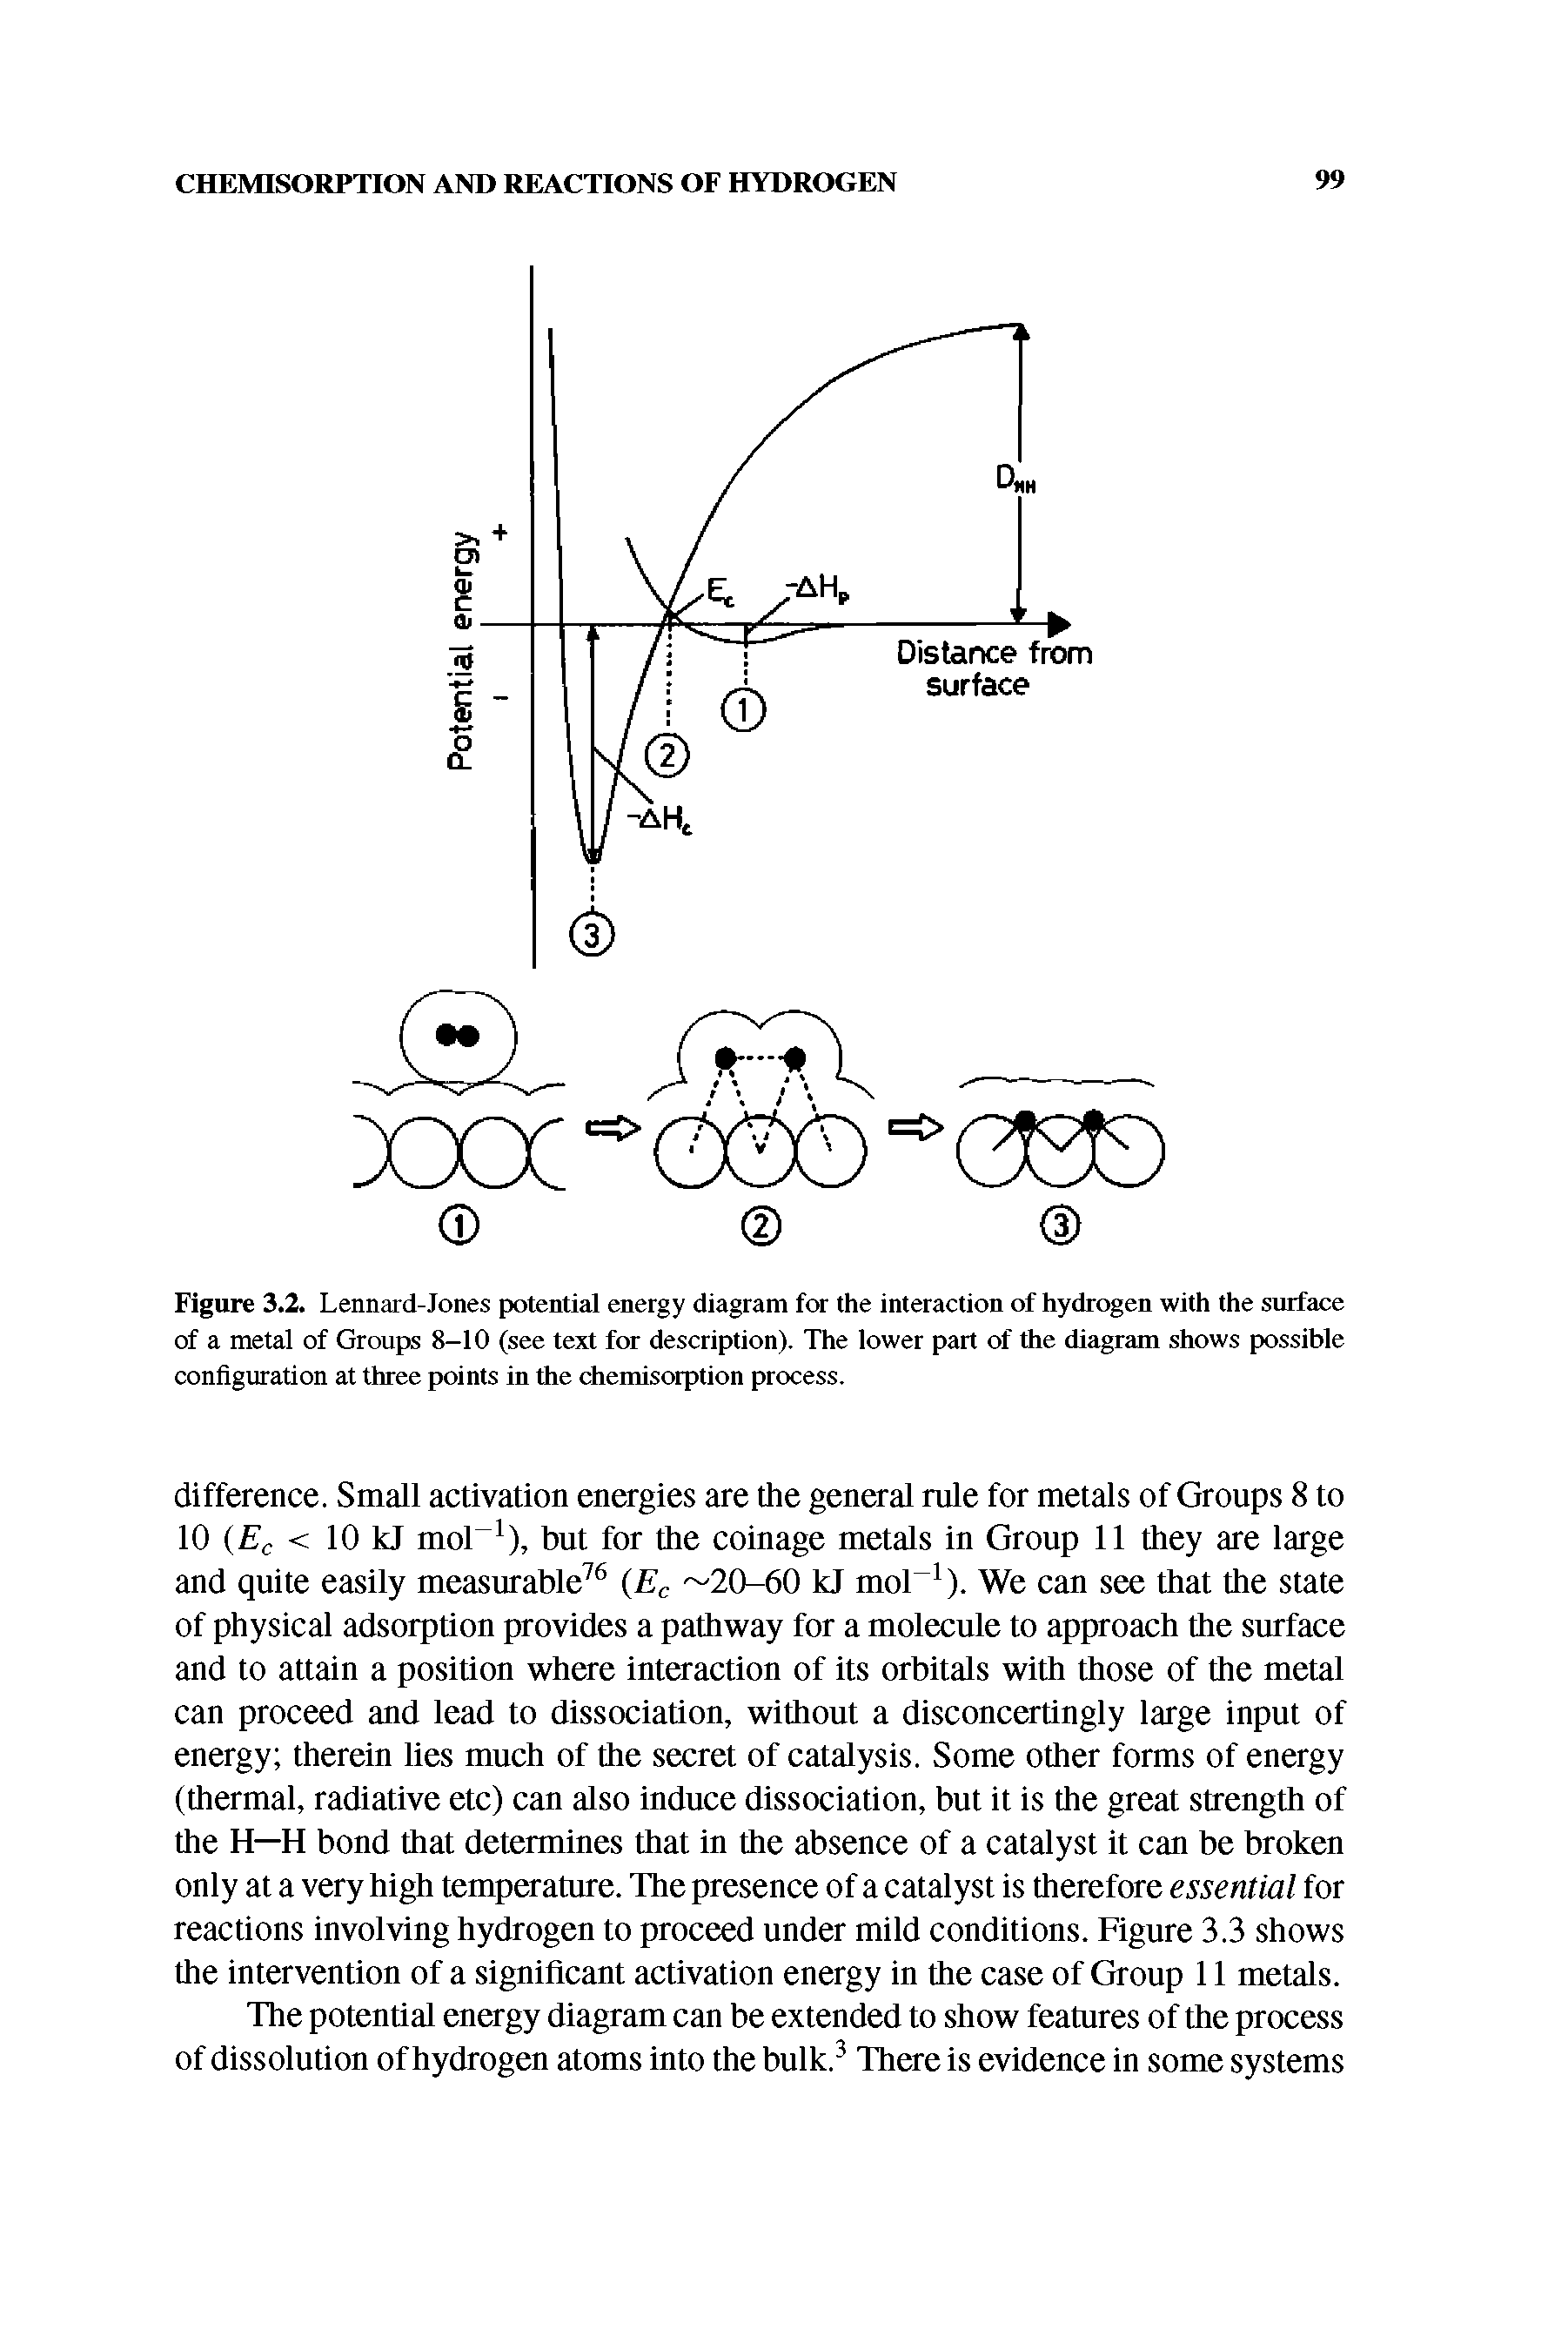 Figure 3.2. Lennard-Jones potential energy diagram for the interaction of hydrogen with the surface of a metal of Groups 8-10 (see text for description). The lower part of the diagram shows possible configuration at three points in the chemisorption process.